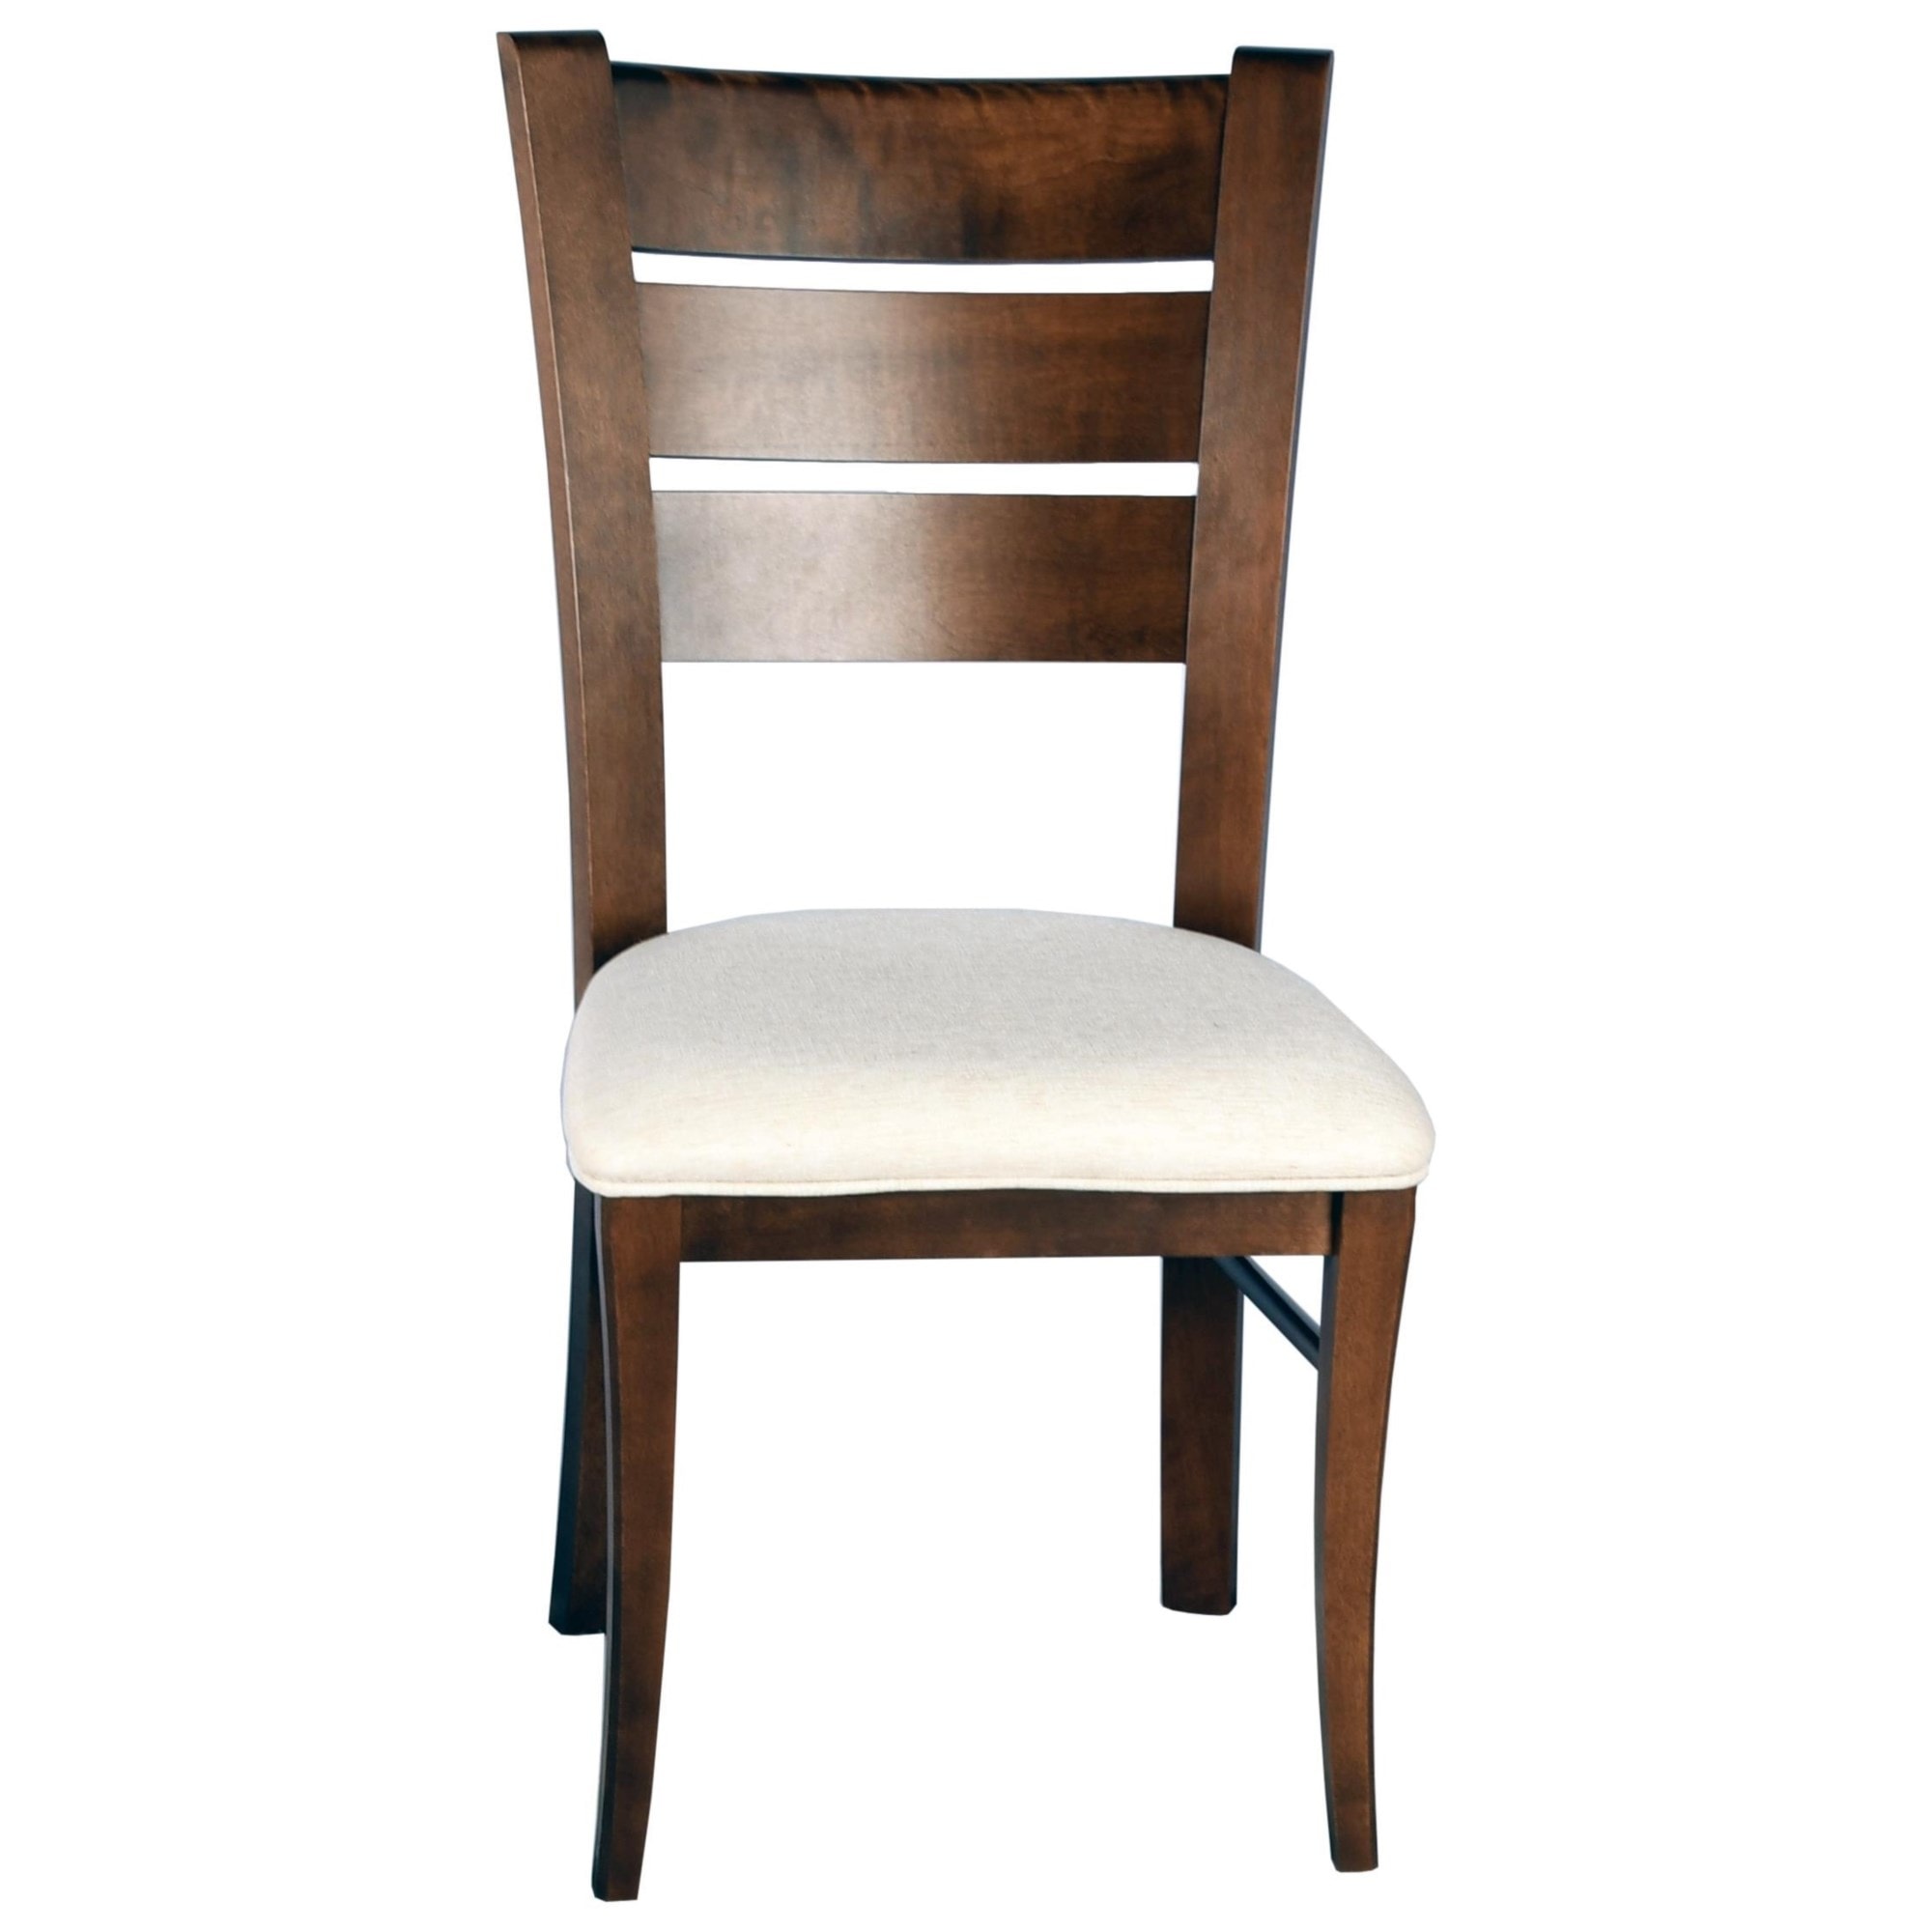 Shop the Chair from Option 2